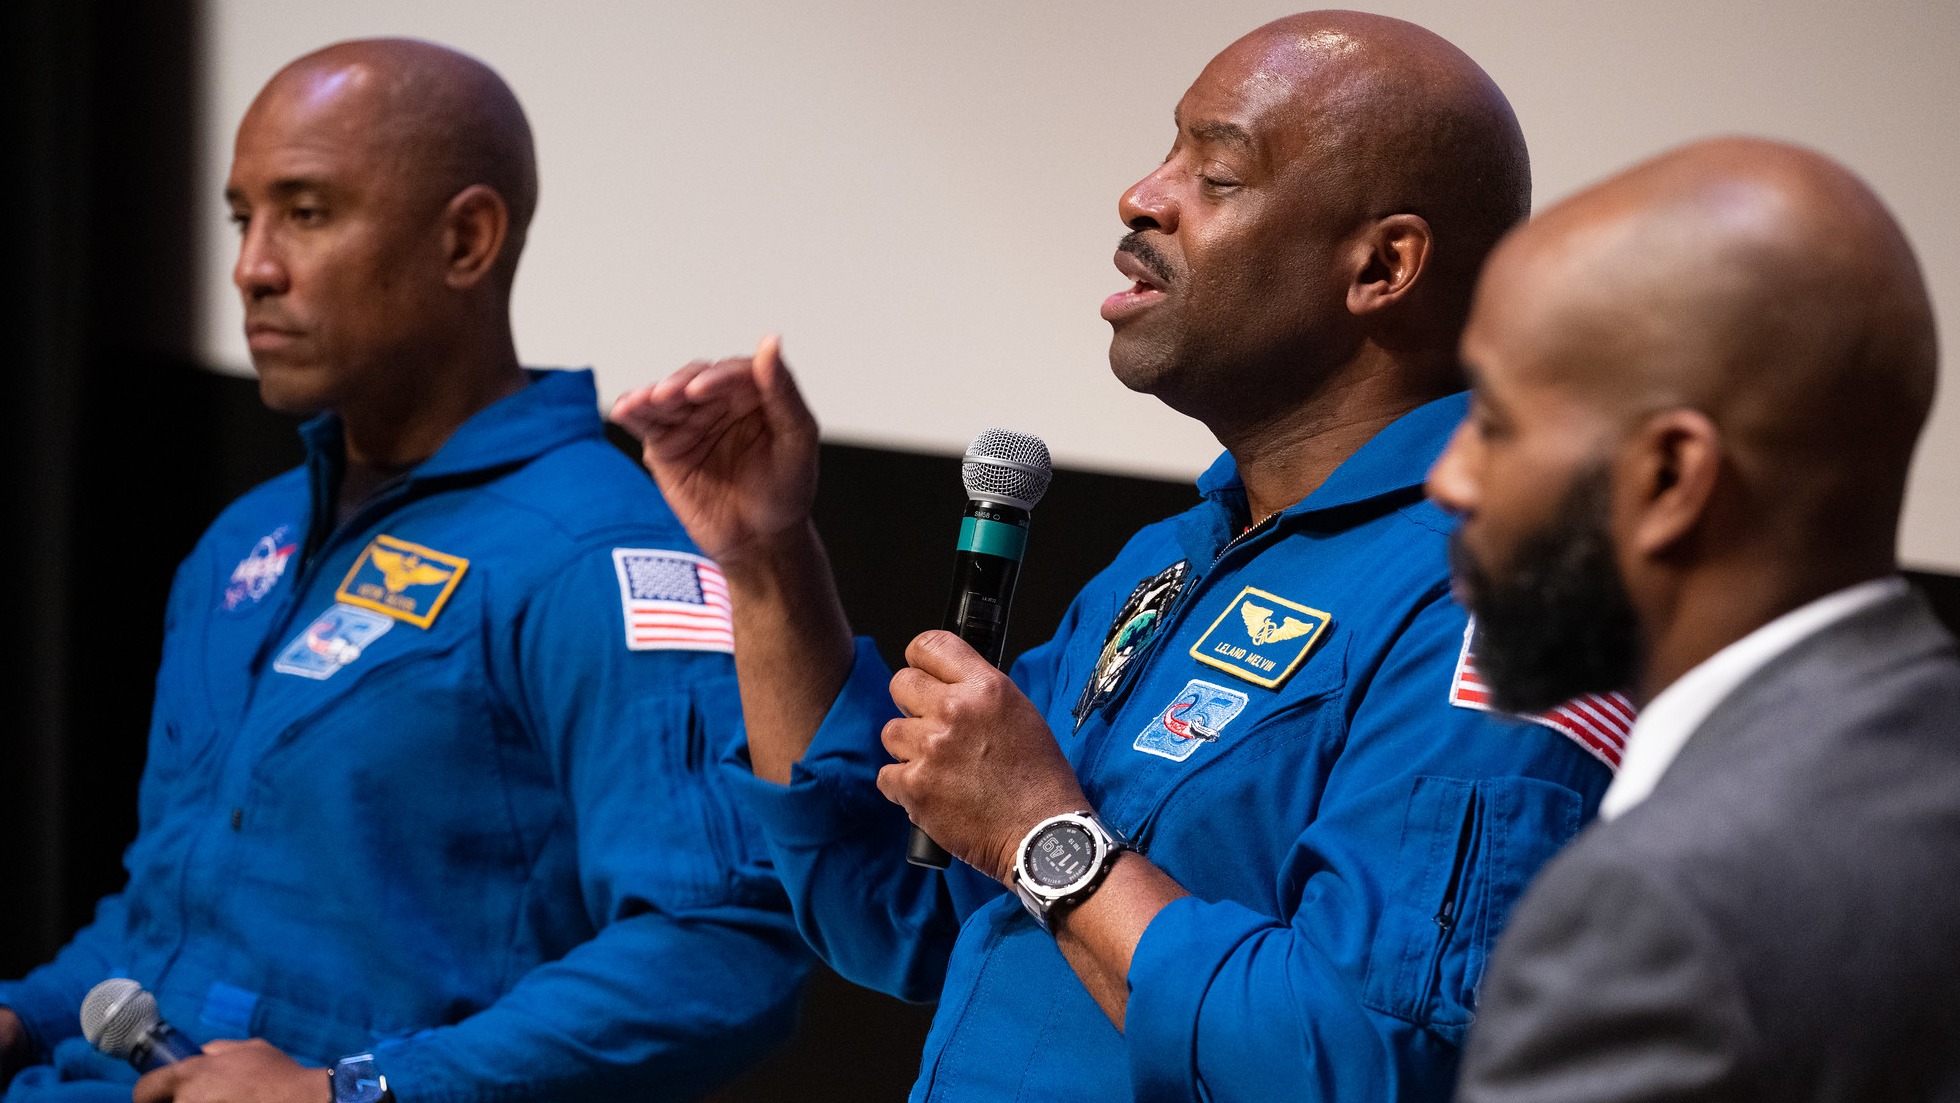 'Black history is American history': NASA celebrates African Americans and space achievements at Smithsonian event